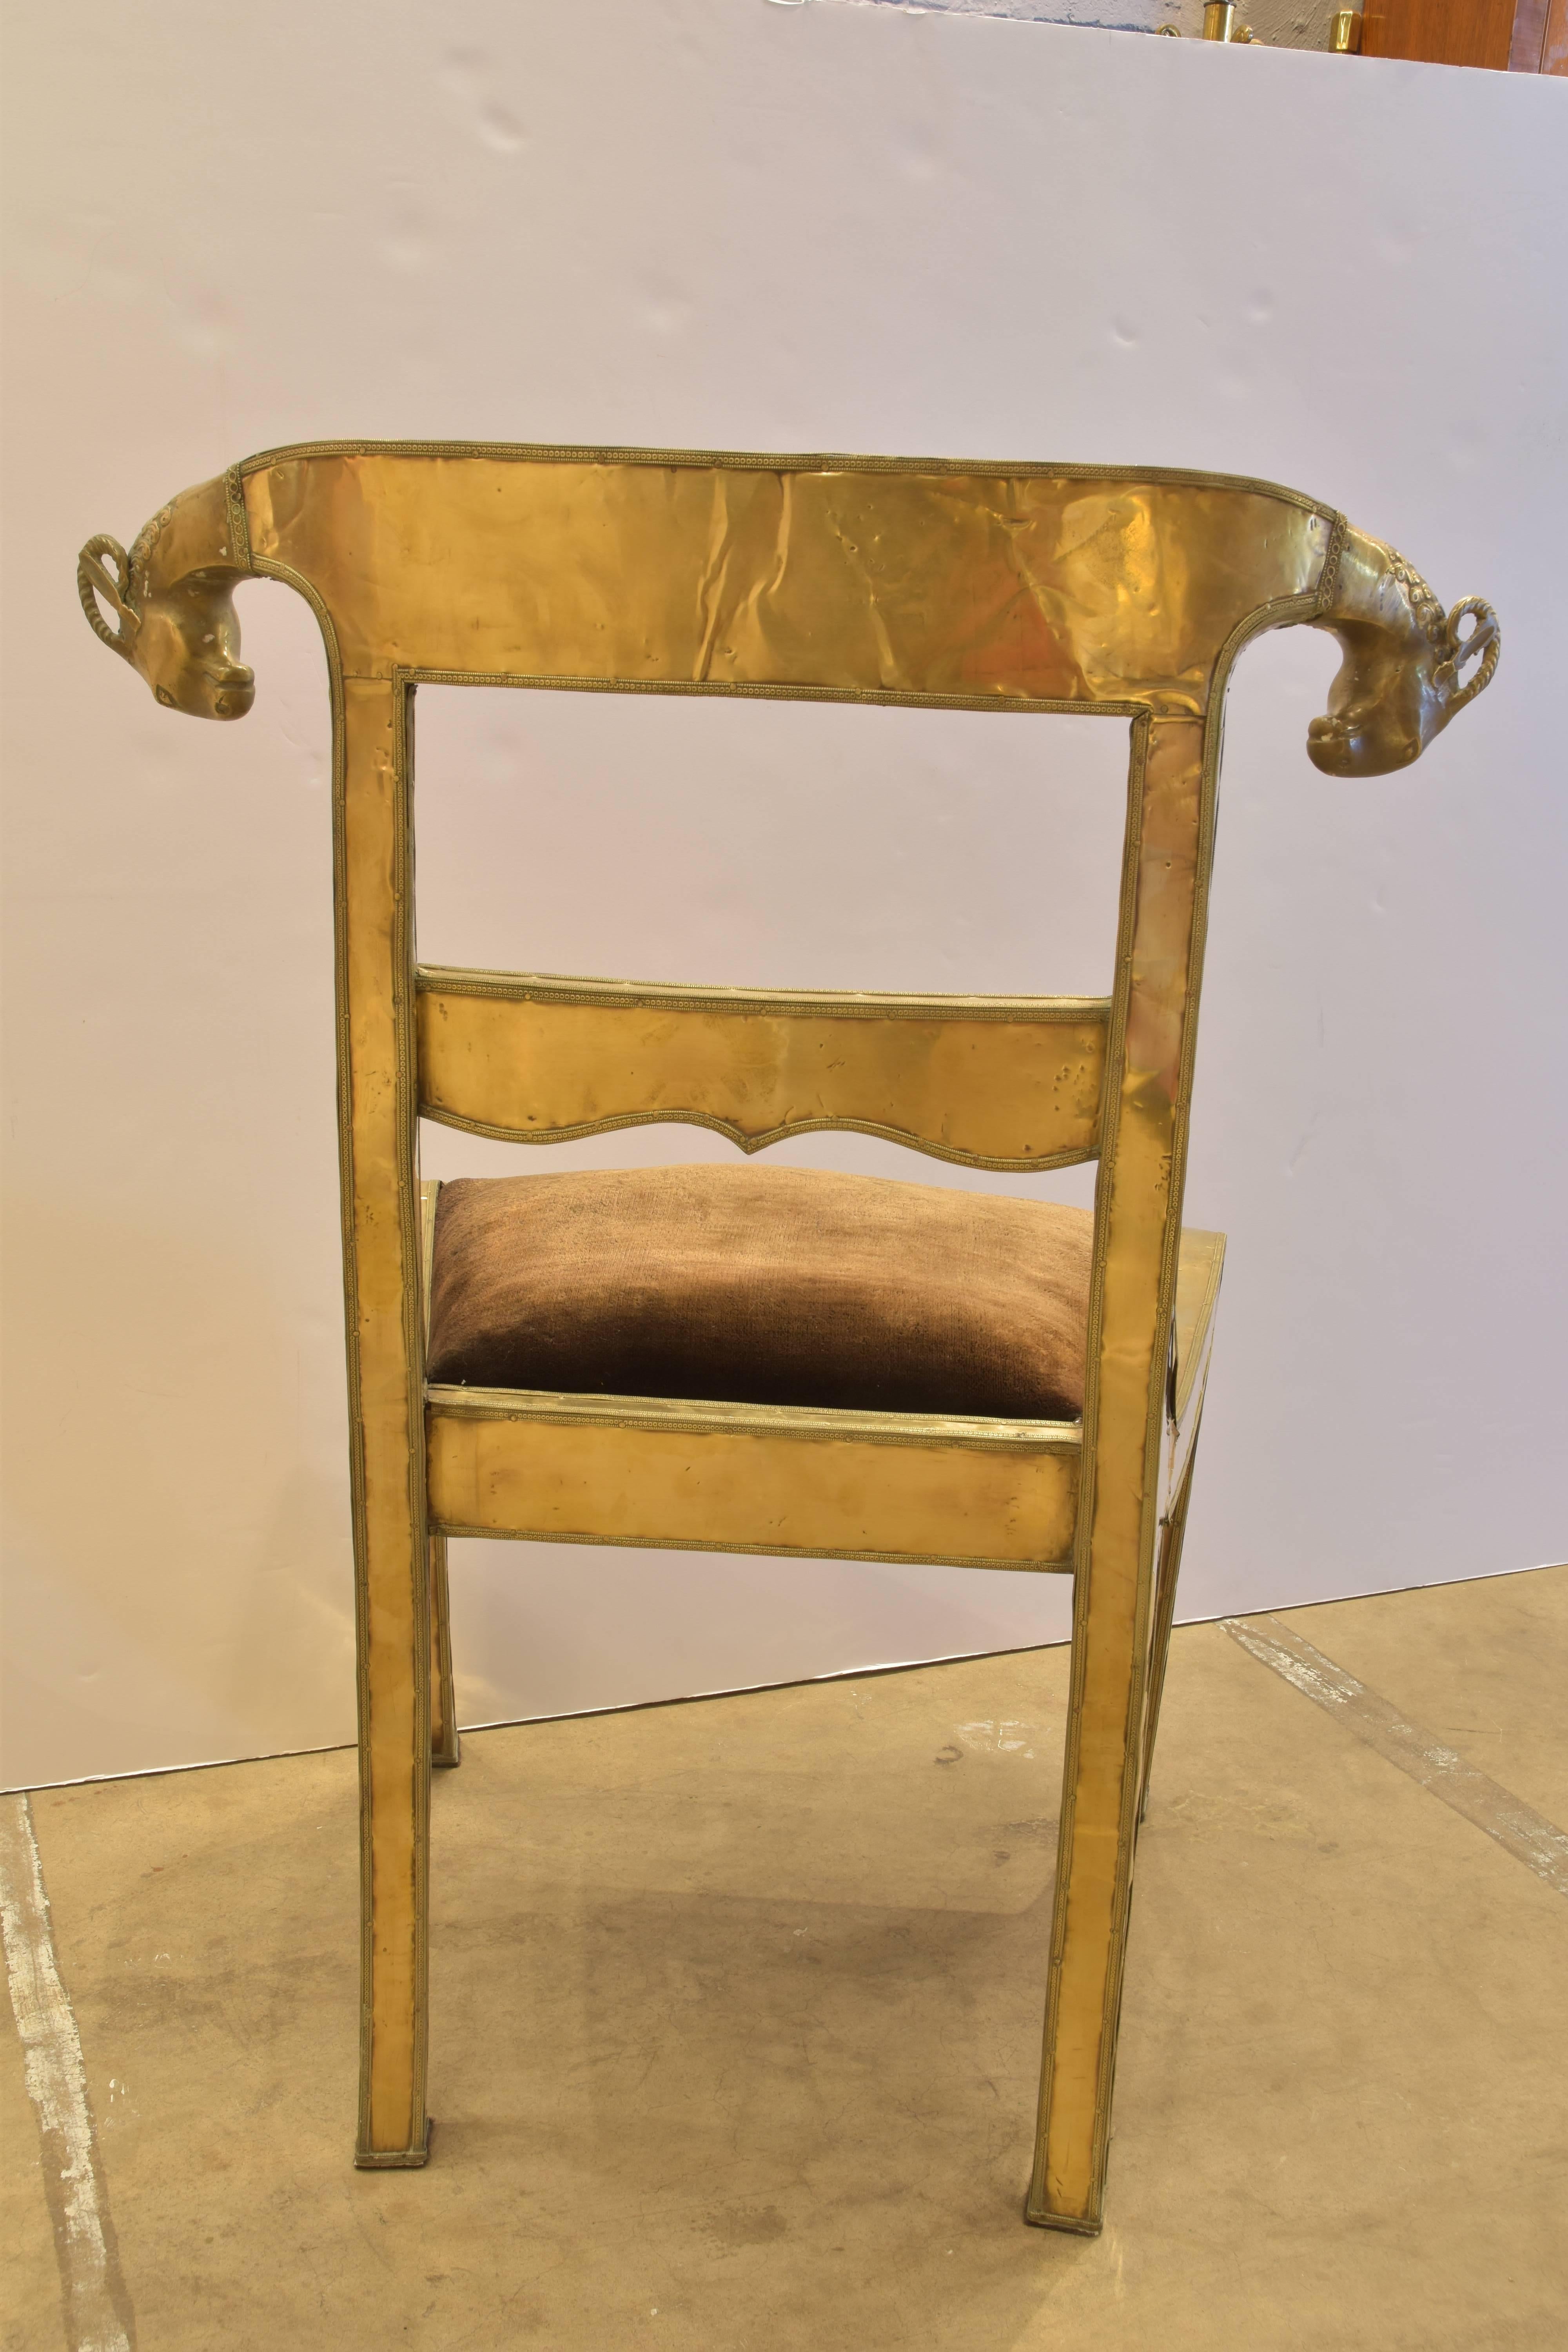 Indian Brass Chair with Ram's Head Detail